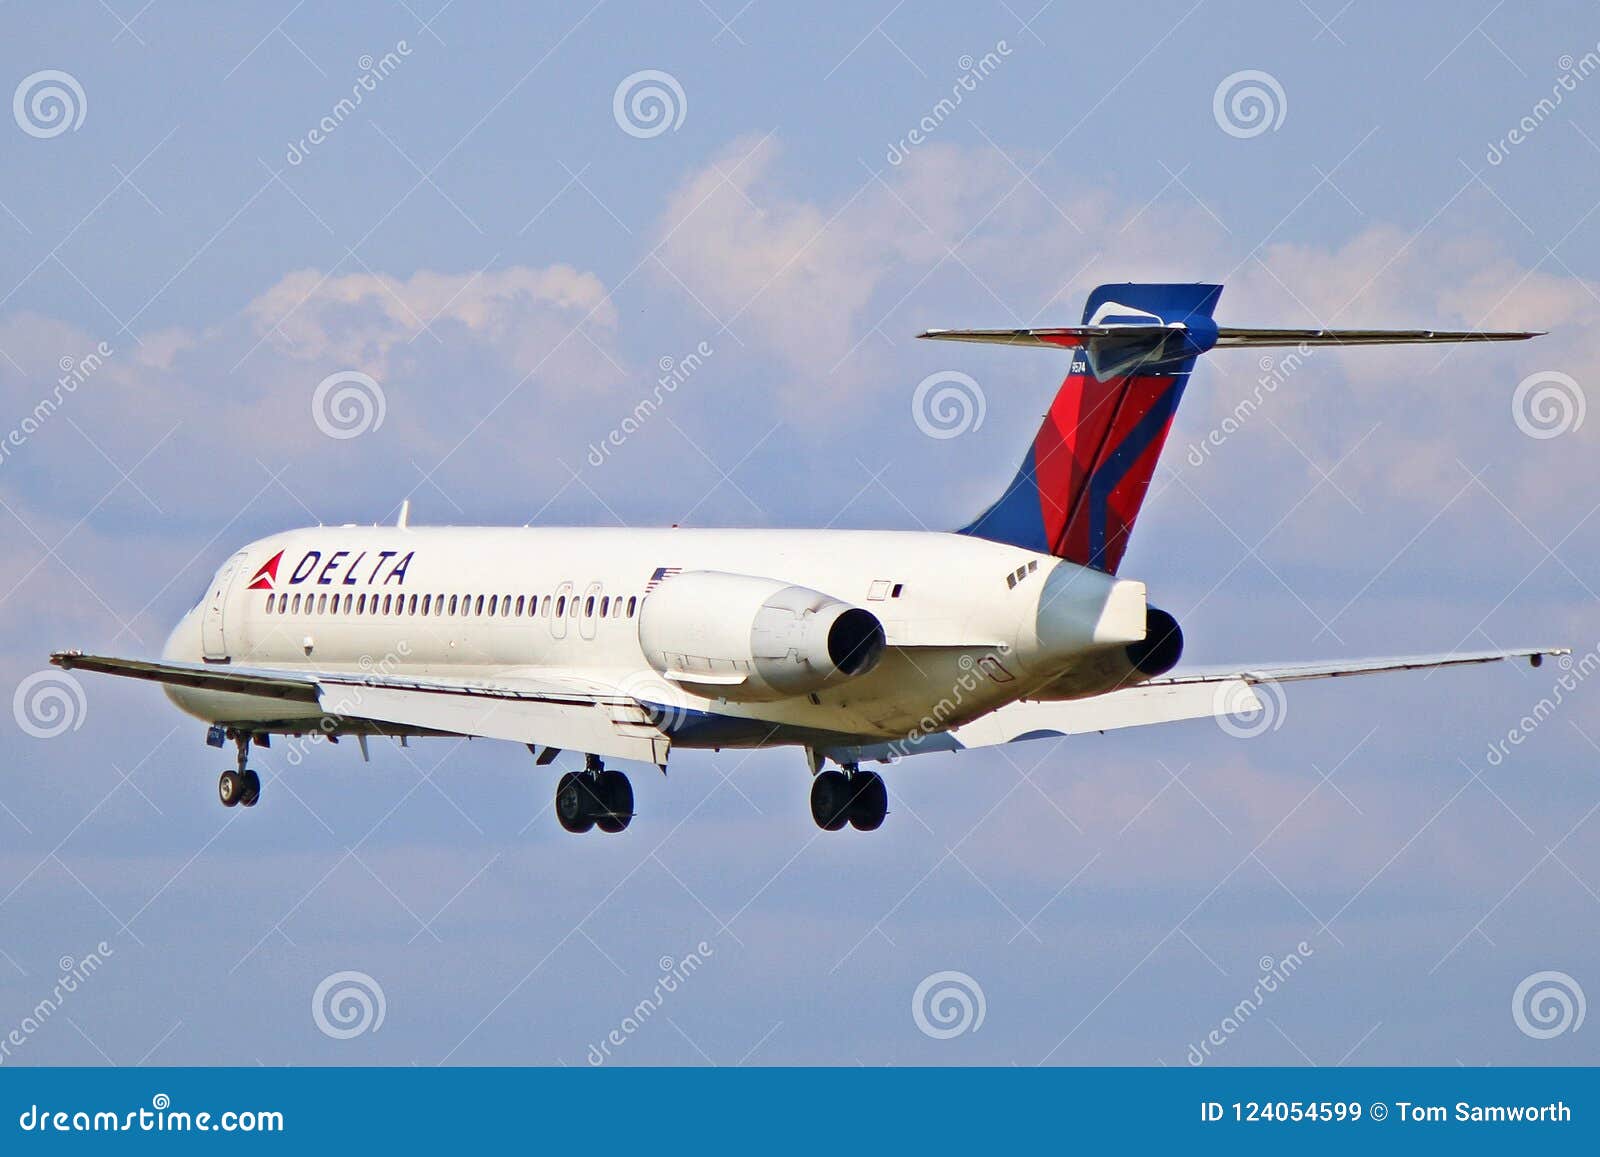 Boeing 717 200 Seating Chart Delta